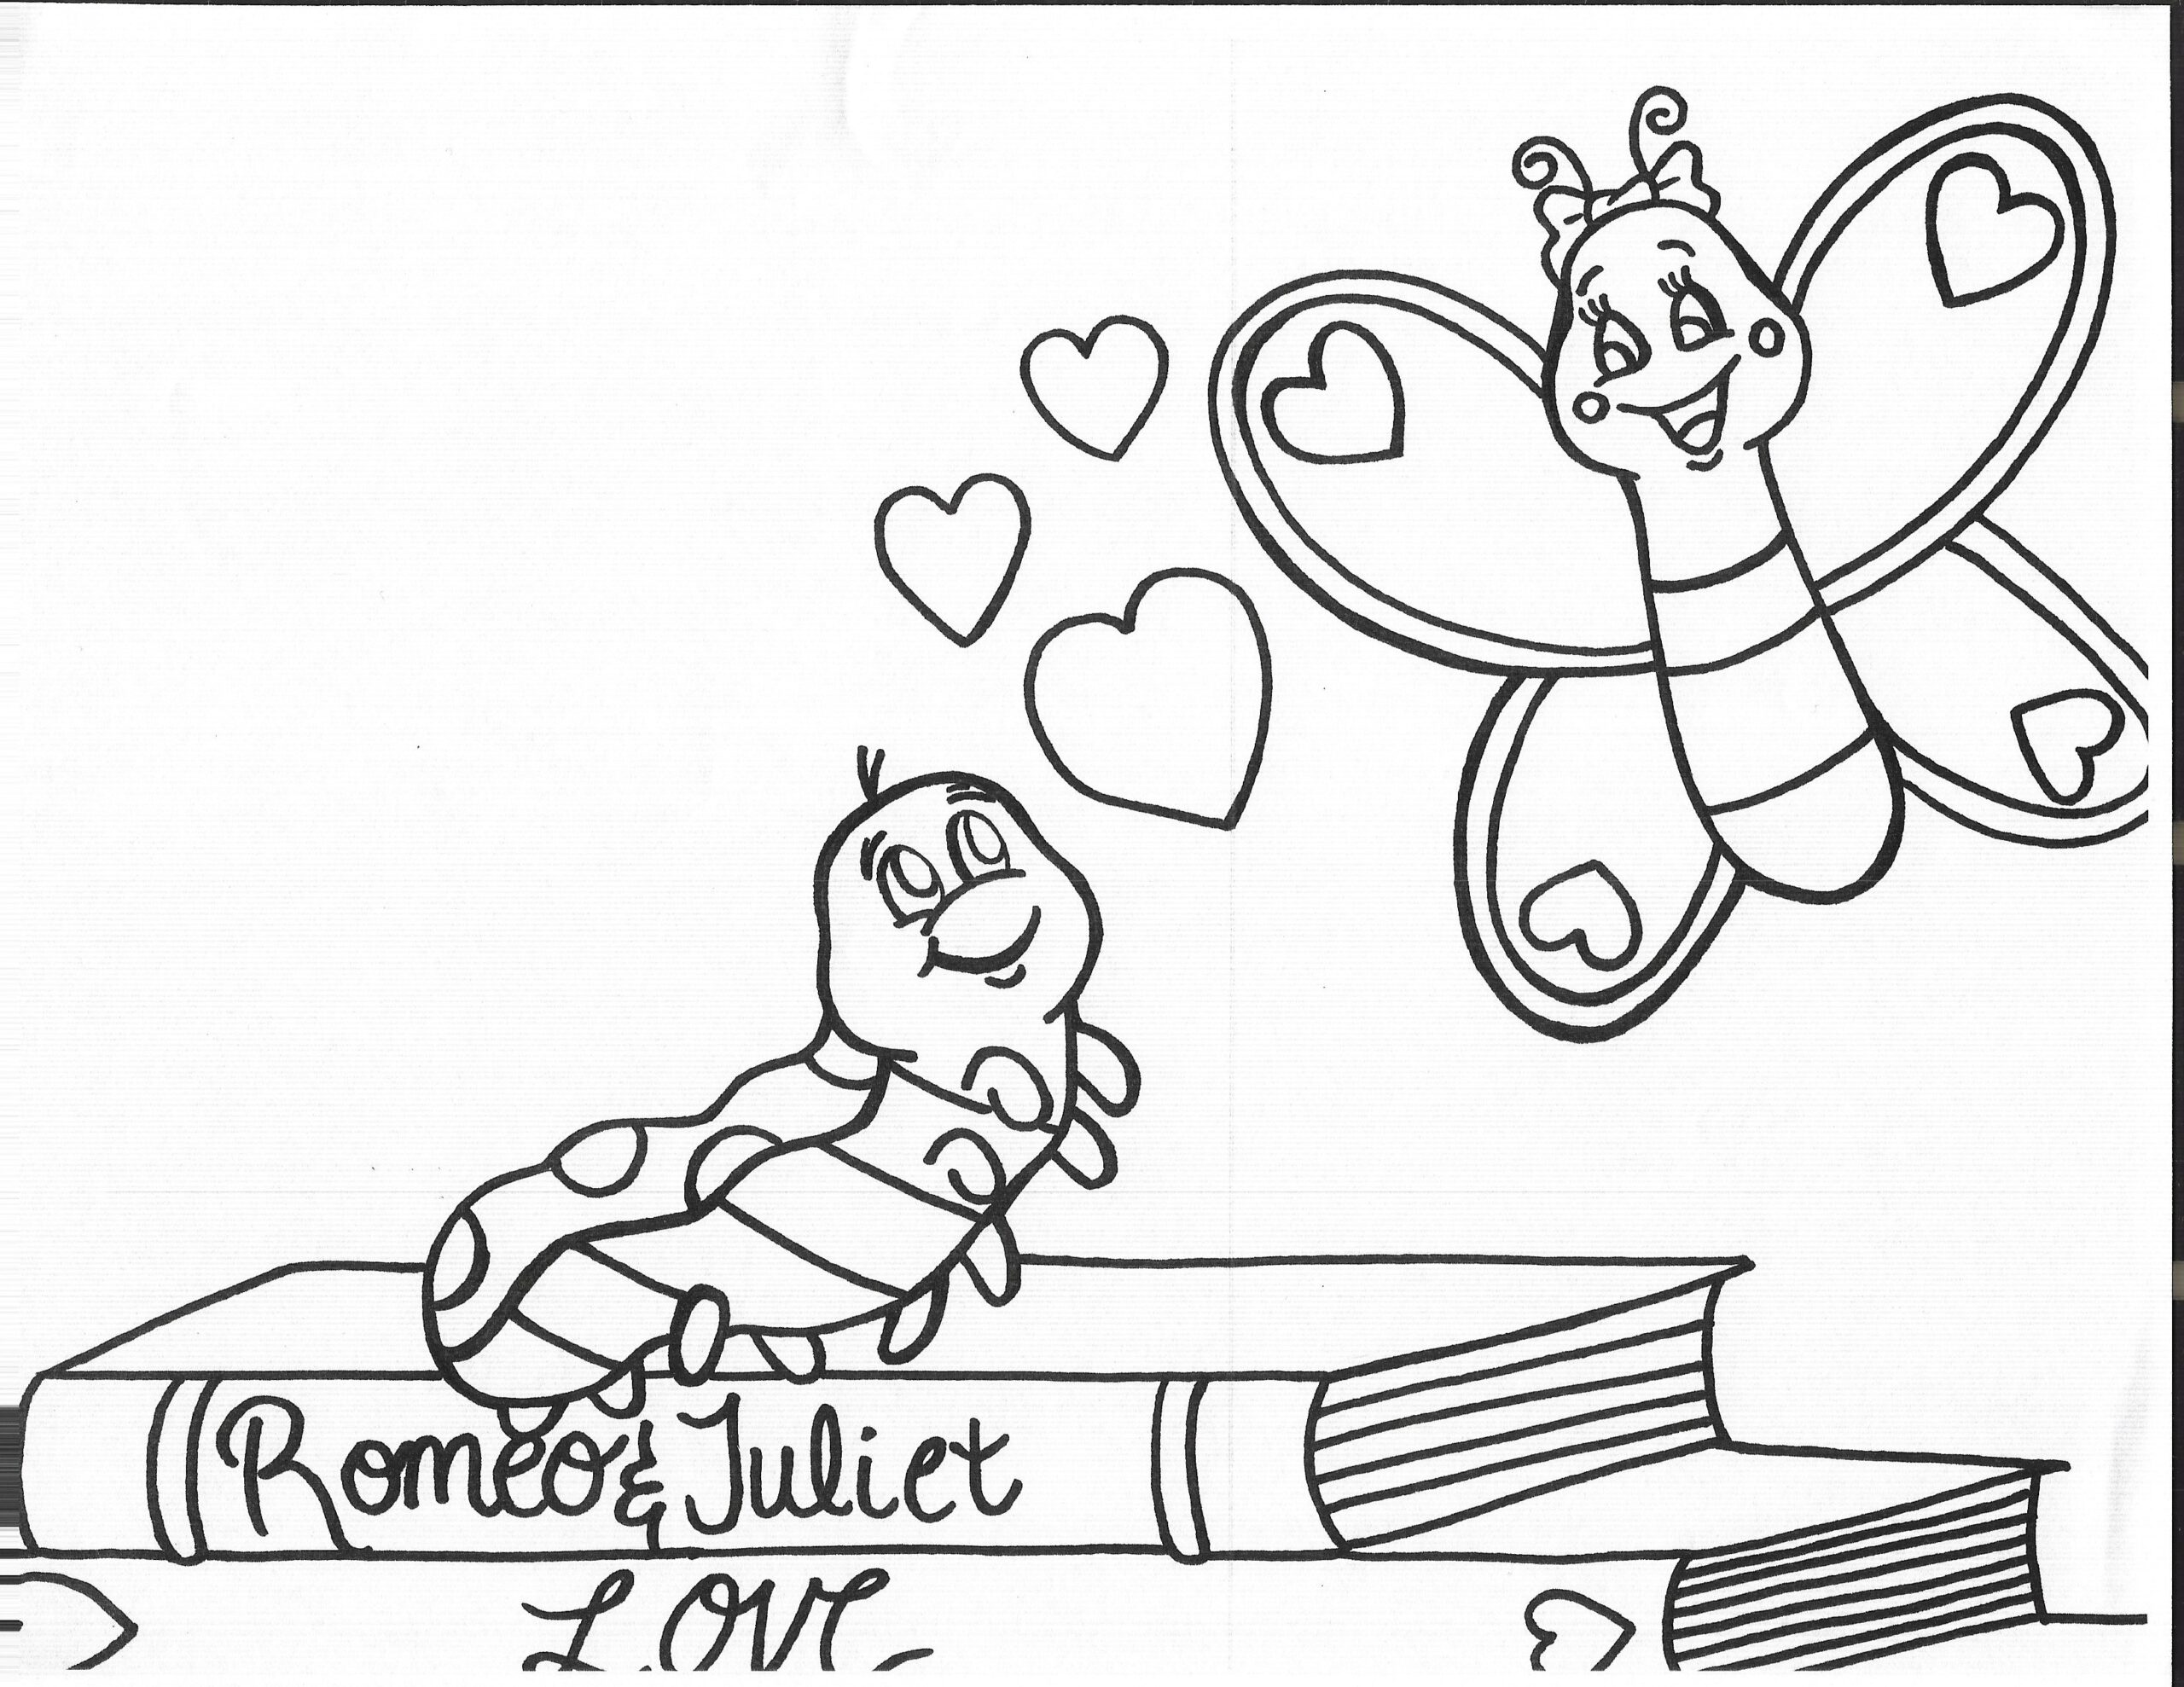 Sebring Public Library staff member, Crystal Martinez created a coloring page using her amazing artistic skills. Feel free to download, print, and then share your colored creation on Facebook using the hastag, #loveyourlibrary! We would love to see your creations! (These are the images of the downloadable PDF)